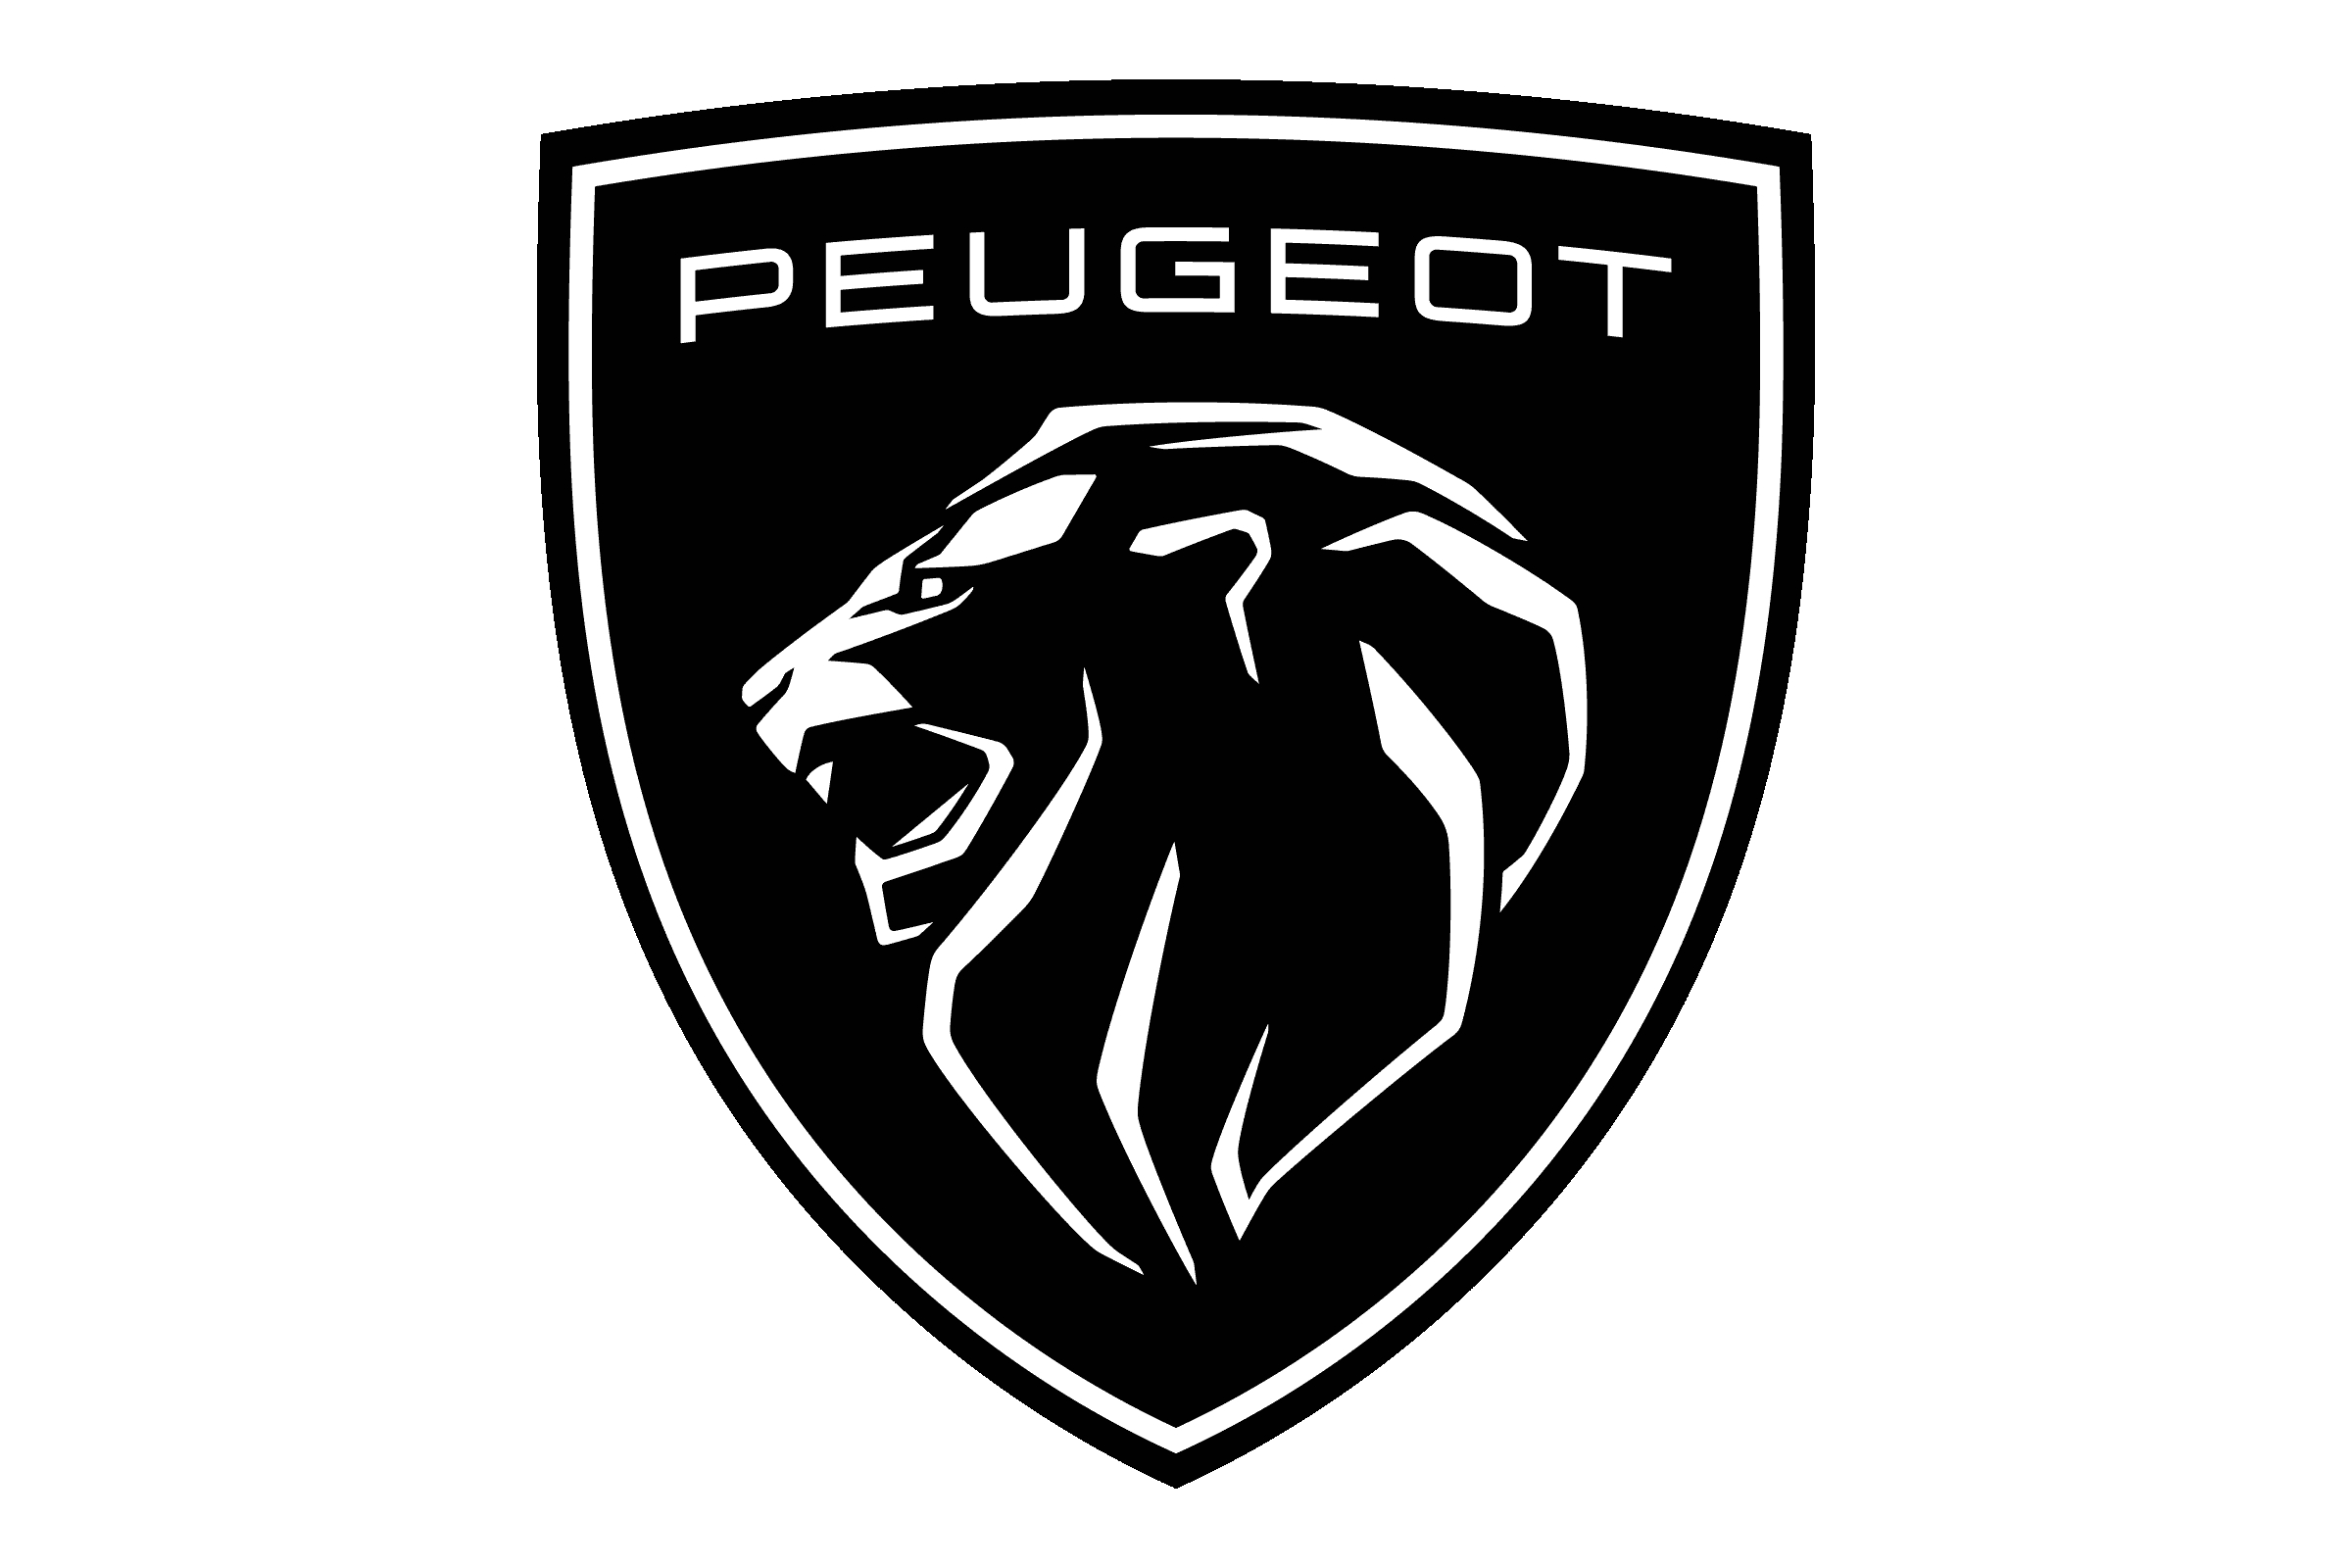 Productos Peugeot